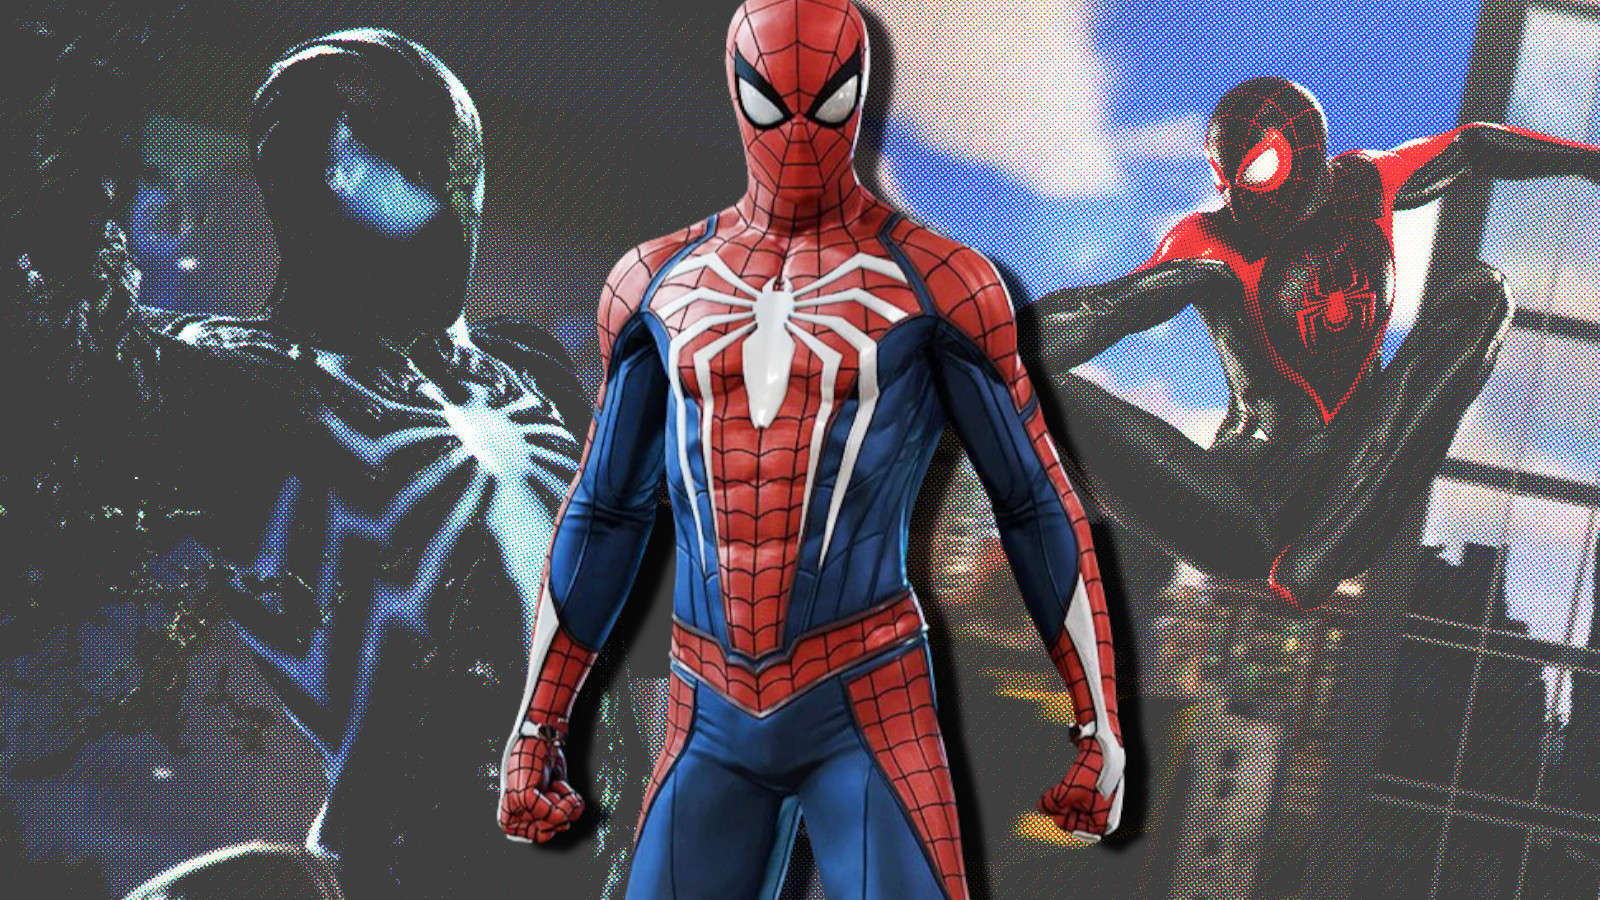 Spider-Man throughout the various Insomniac games